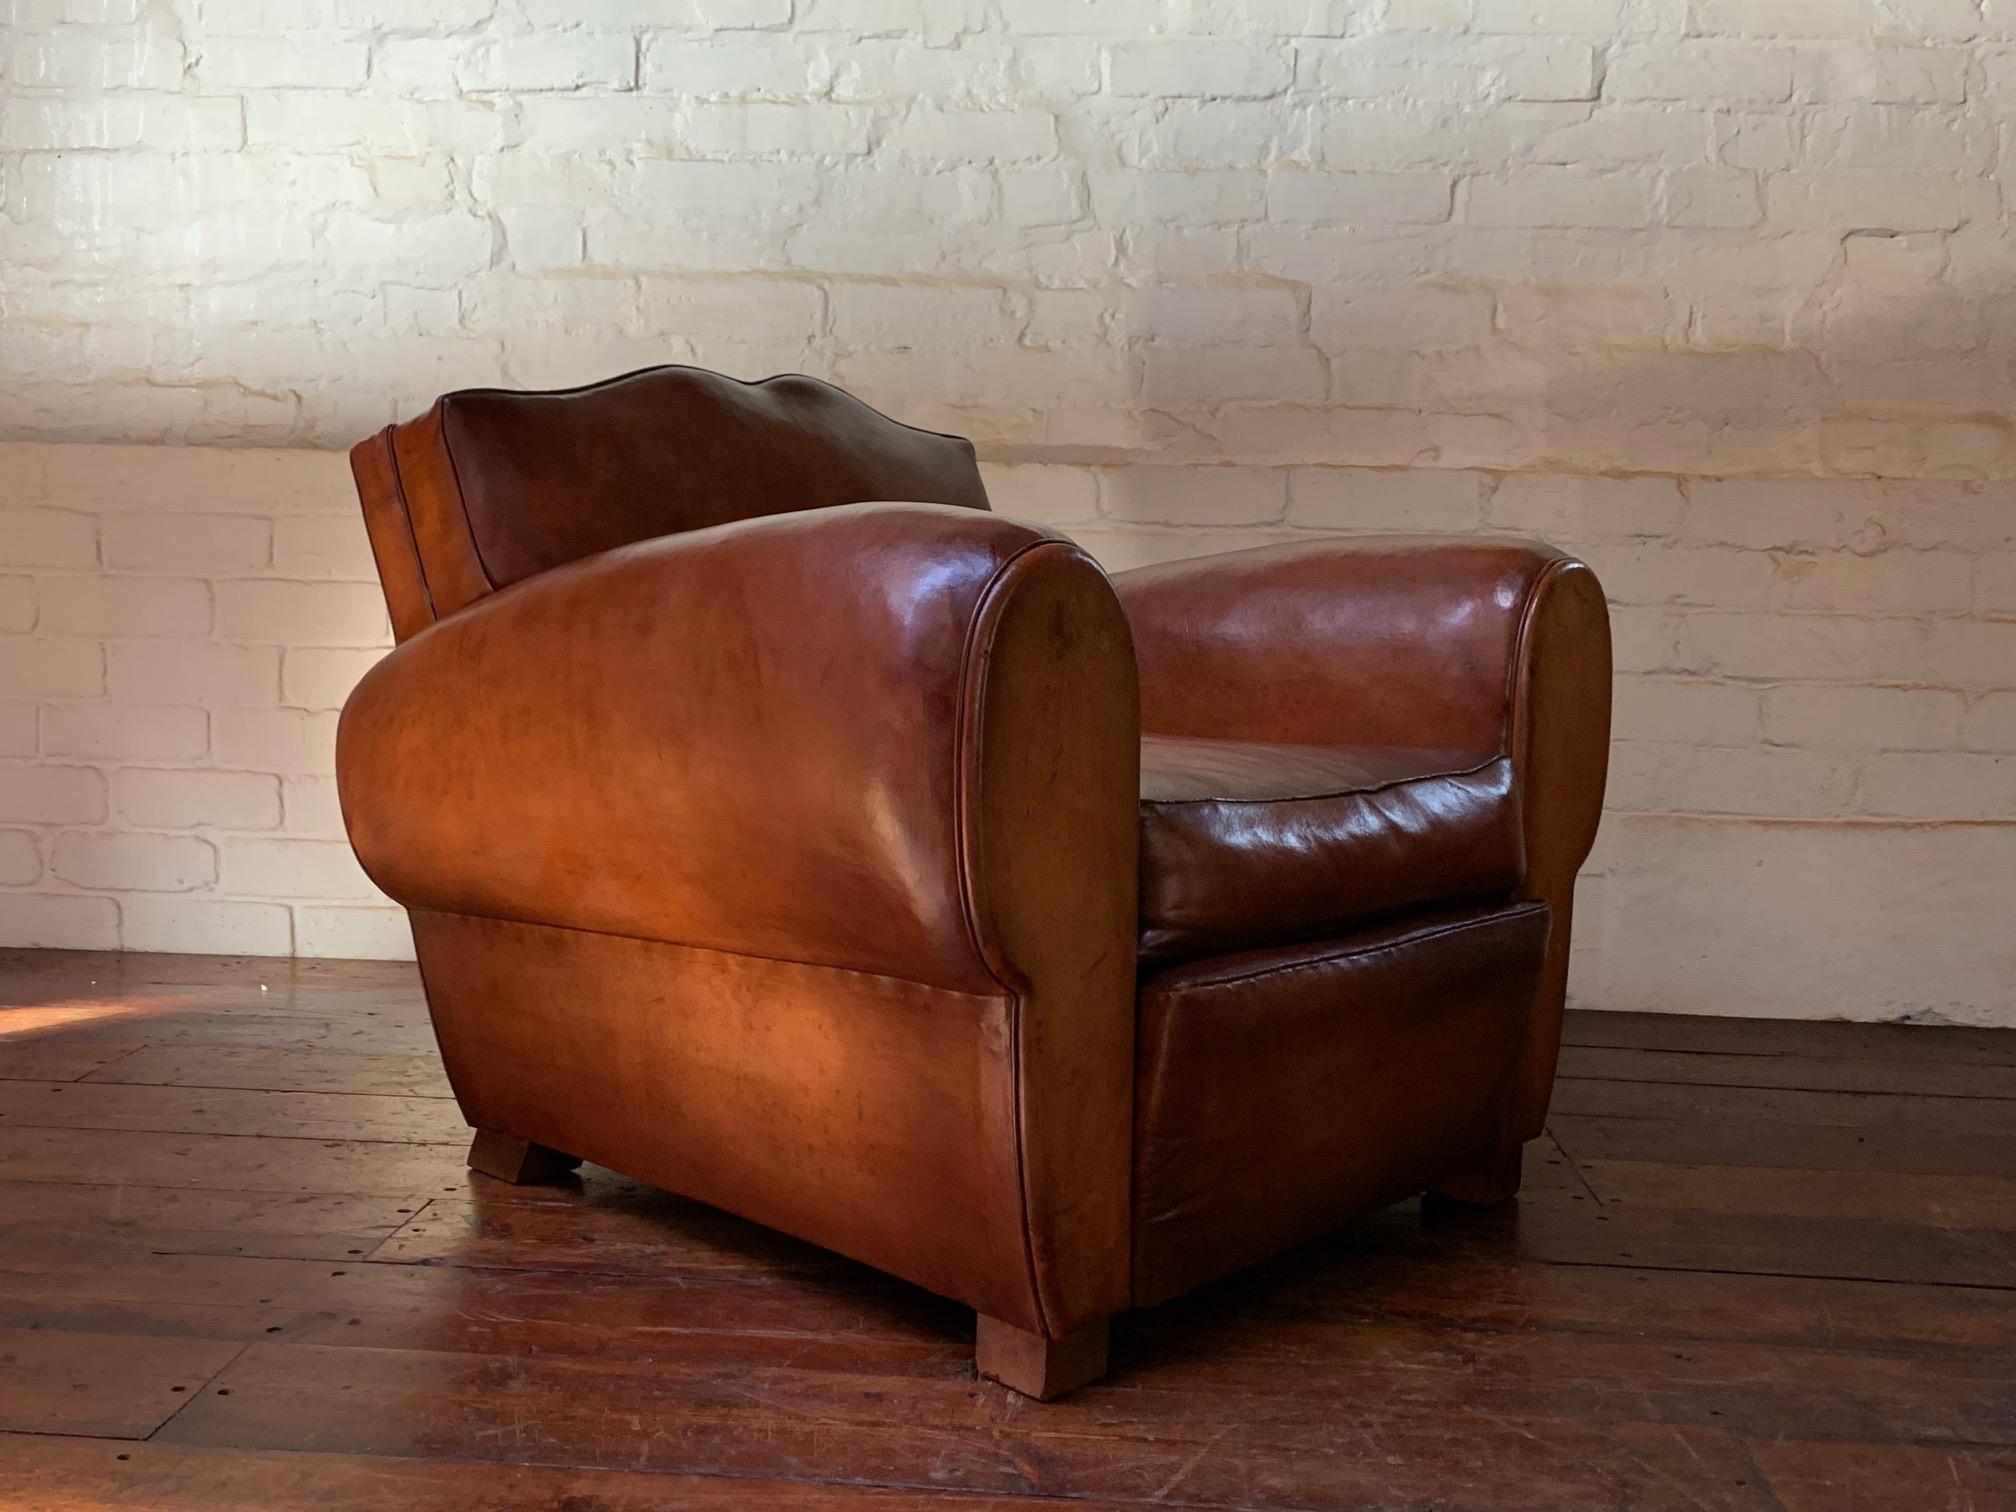 

This chair is one of the best original moustache backs we have ever had the pleasure to source. Its wide seat, deep proportions and low-slung back, coupled with its simply remarkable condition, make this particular chair very special. The light